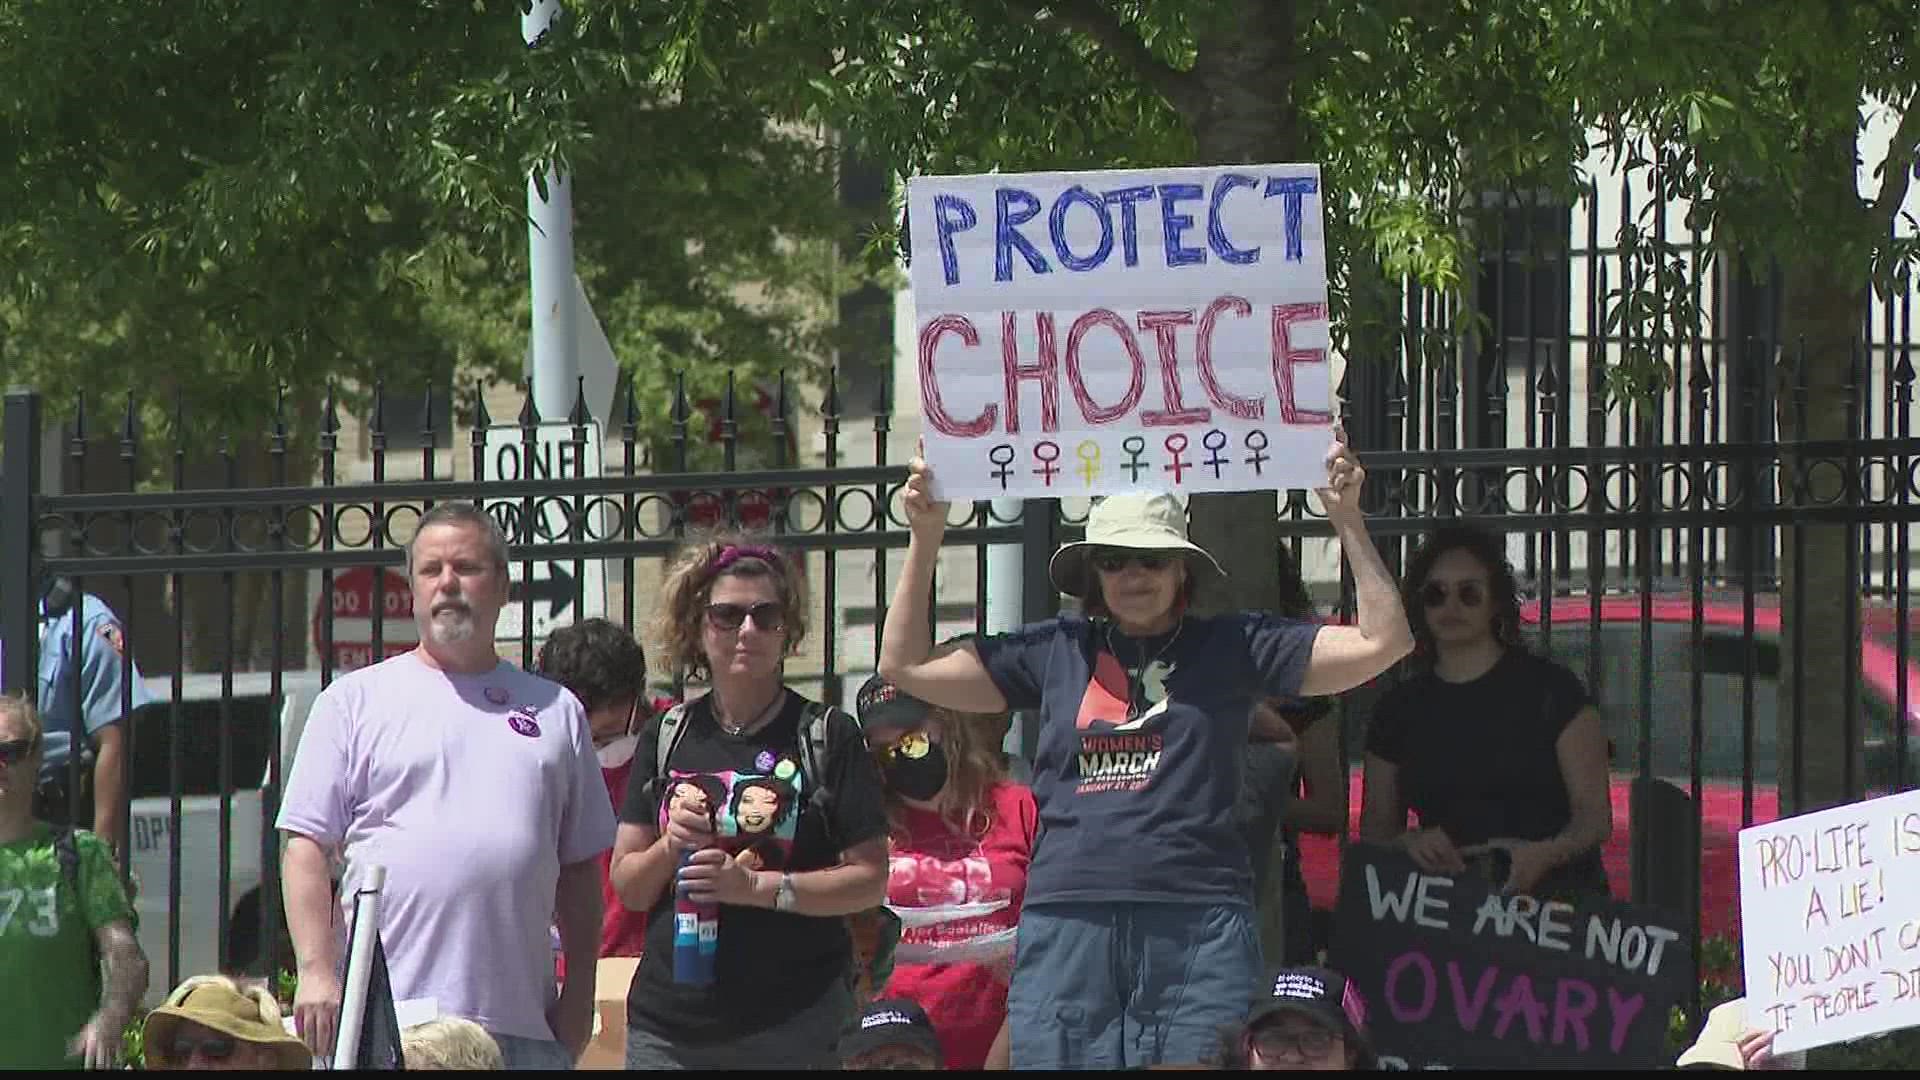 Abortion rights backers took to the streets in anger Saturday over the possible overturning of the landmark ruling.